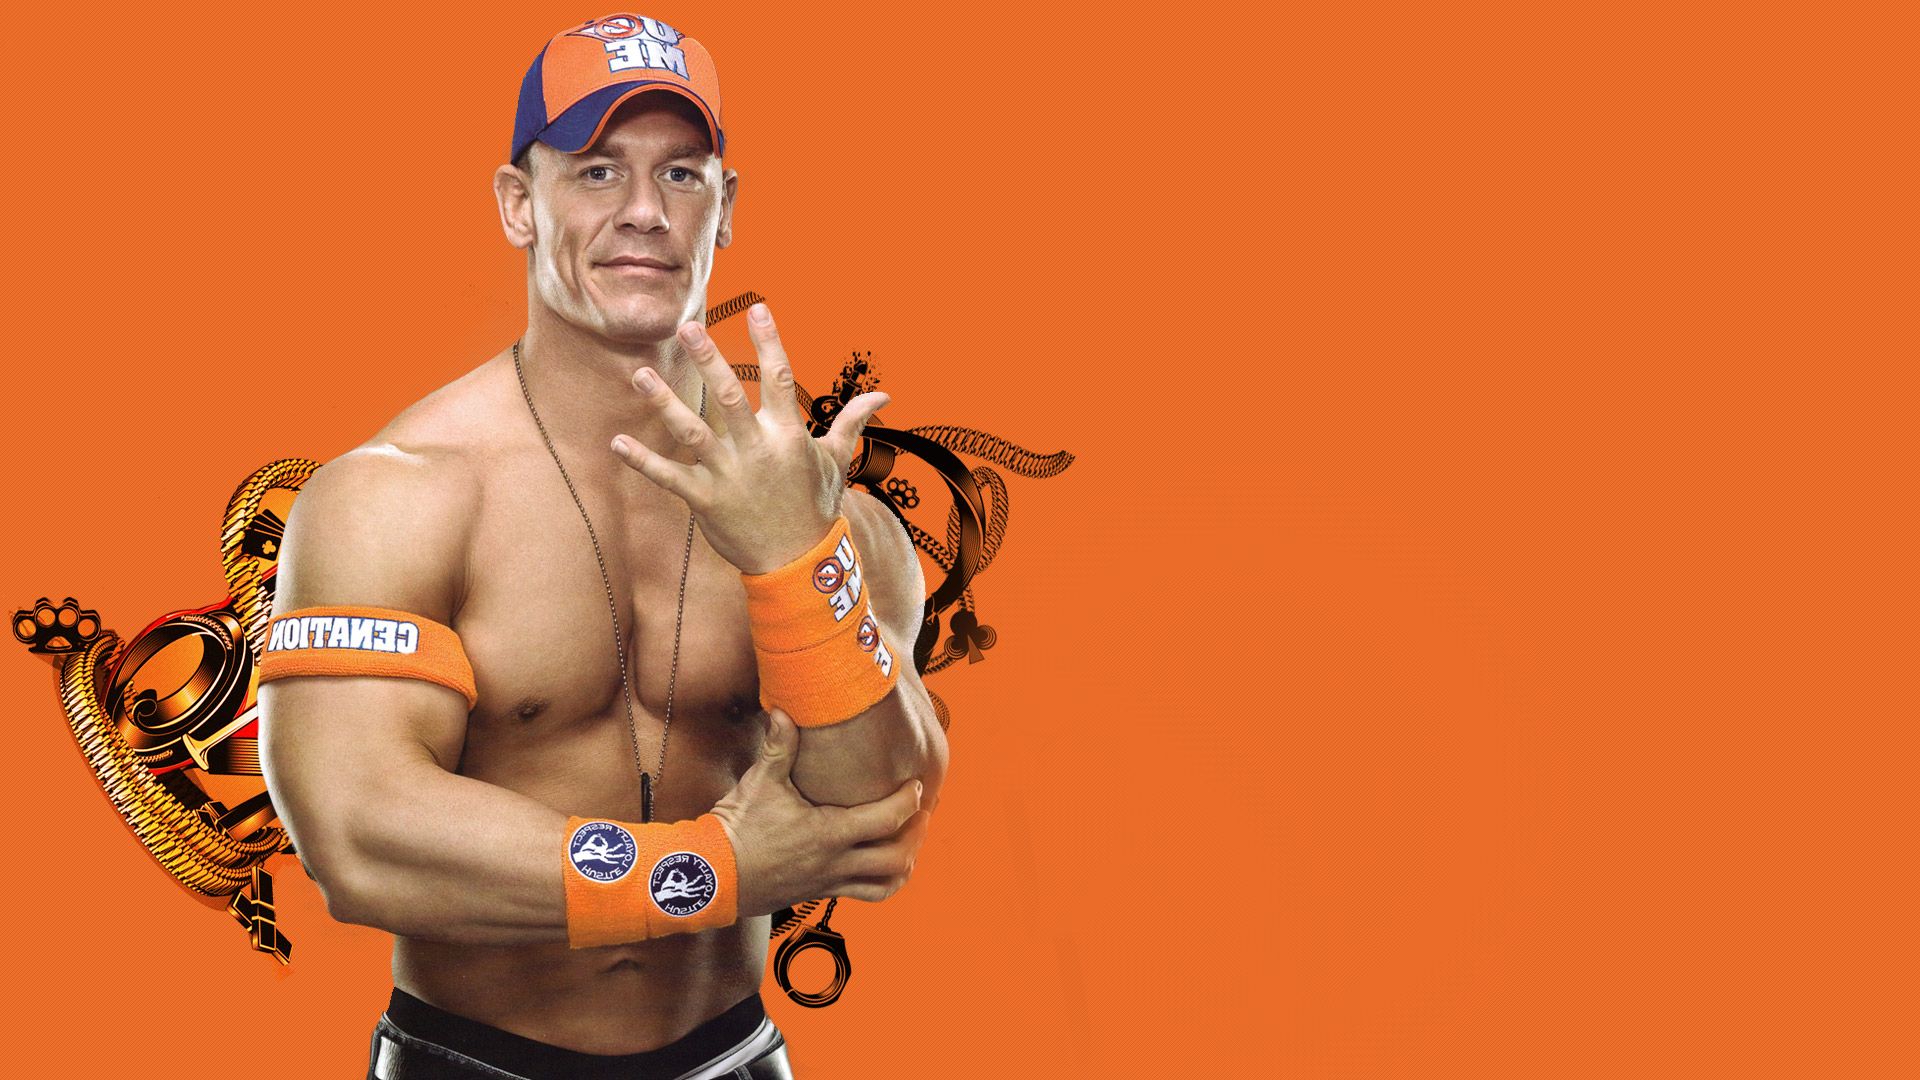 🔥 Free Download Wwe John Cena Wallpapers Hd 1920x1080 For Your